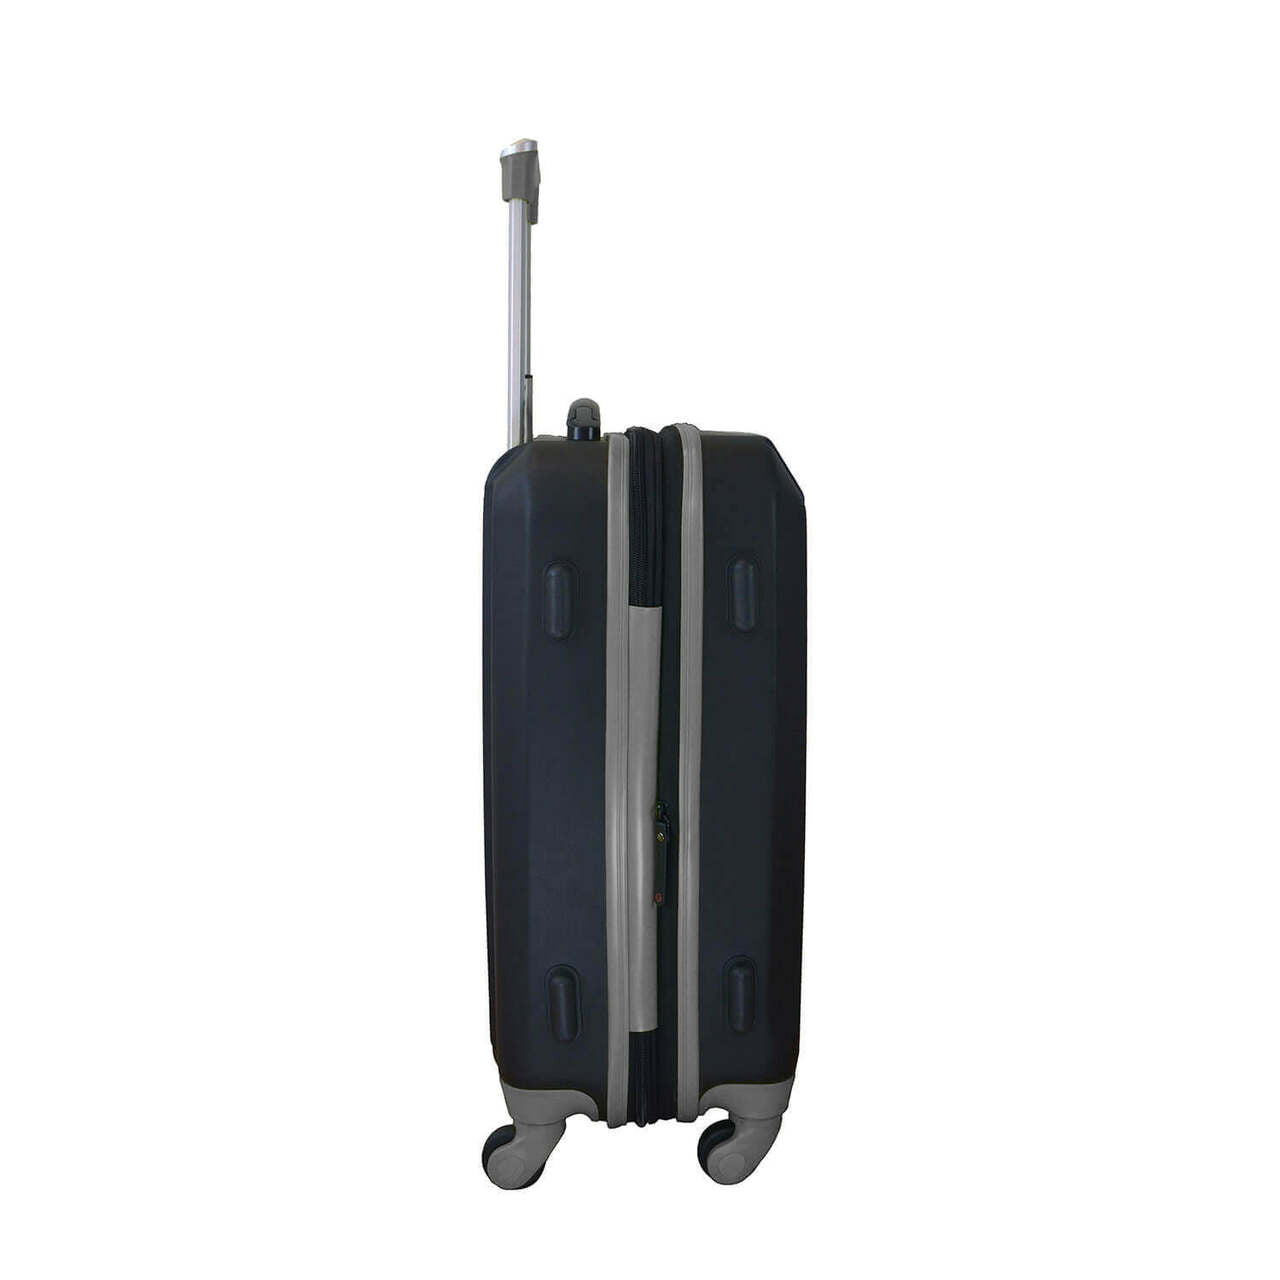 Sharks Carry On Spinner Luggage | San Jose Sharks Hardcase Two-Tone Luggage Carry-on Spinner in Gray